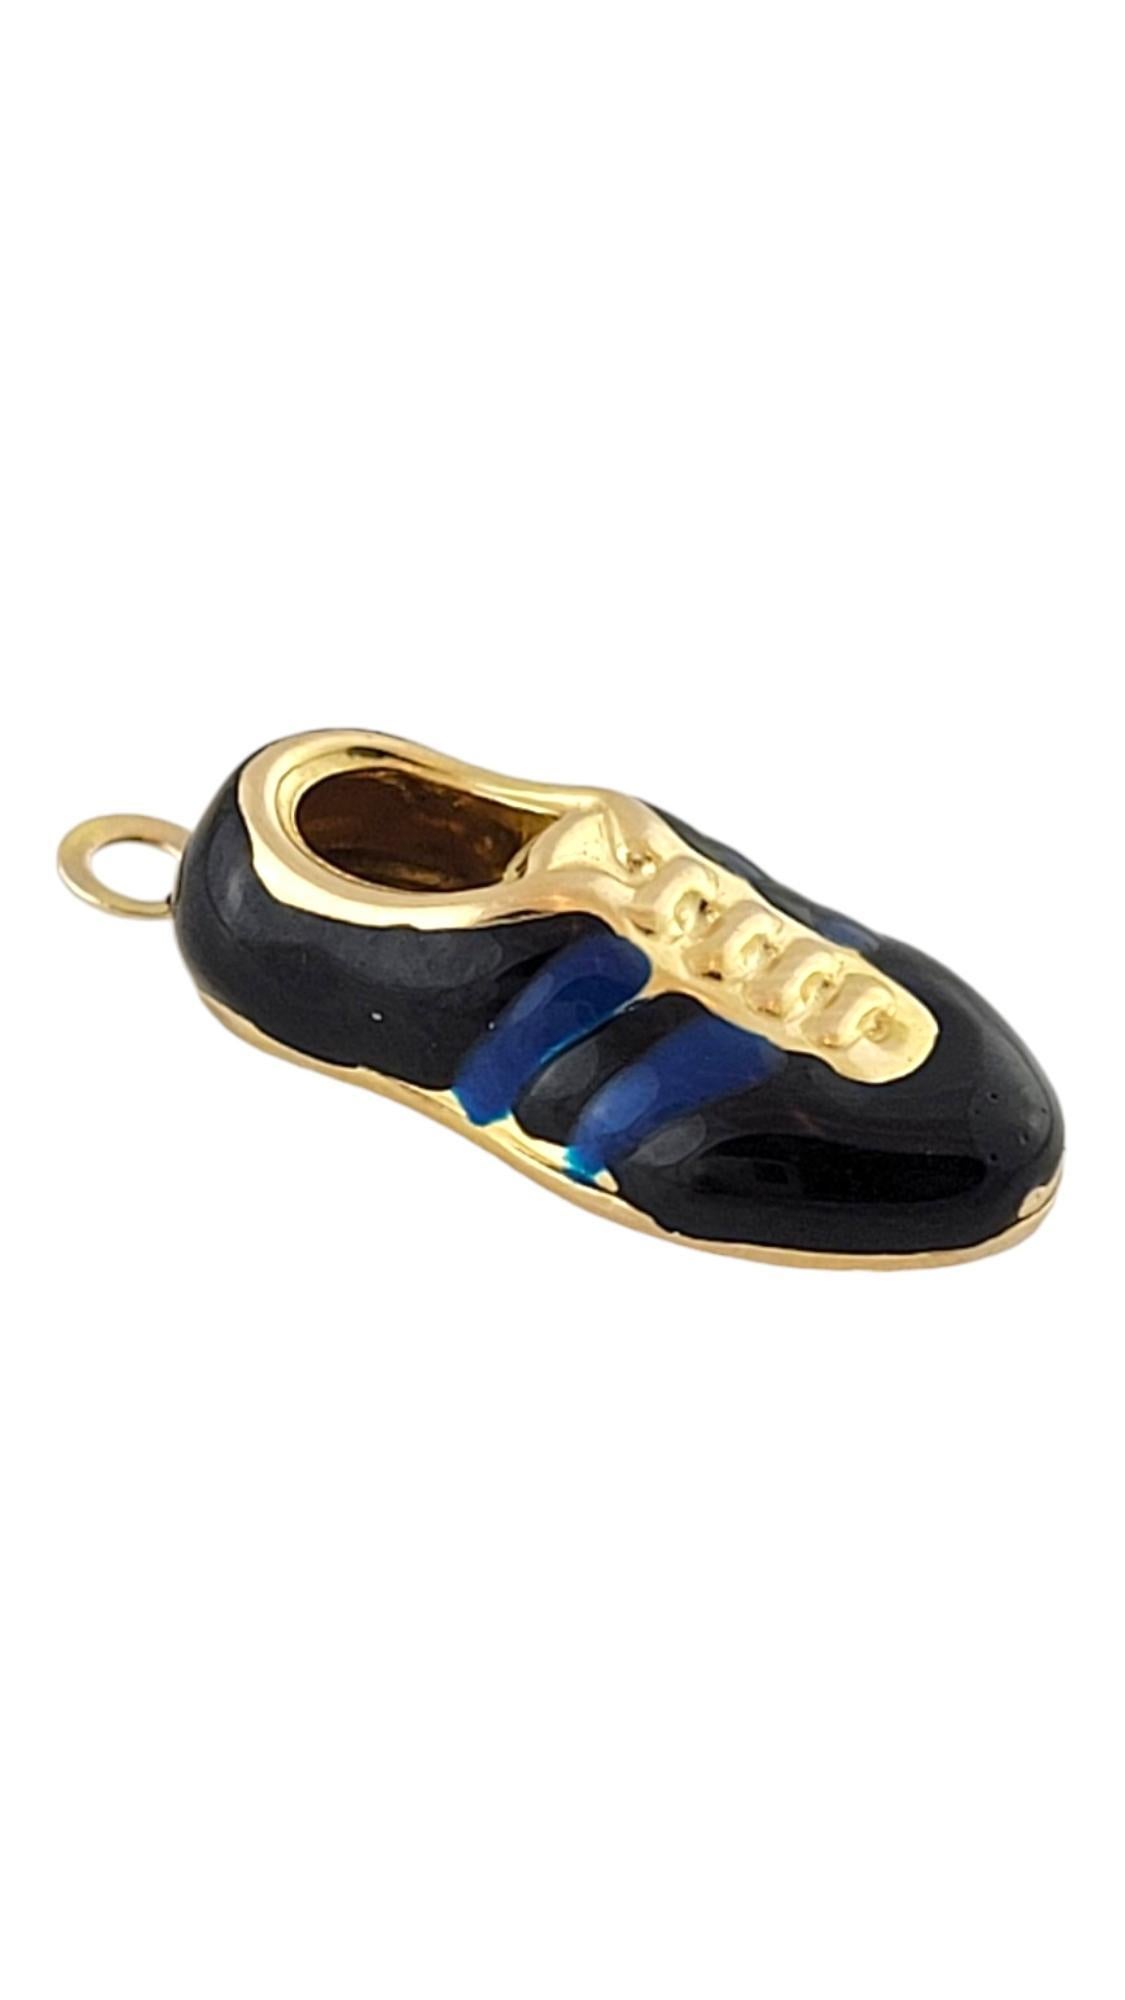 14K Yellow Gold Black & Blue Enamel Sneaker Charm

This adorable shoe charm is crafted from 14K yellow gold with blue and black enamel!

Size: 21.23mm X 9.38mm X 5.92mm

Weight: 0.69 dwt/ 1.08 g

Tested 14K

Very good condition, professionally